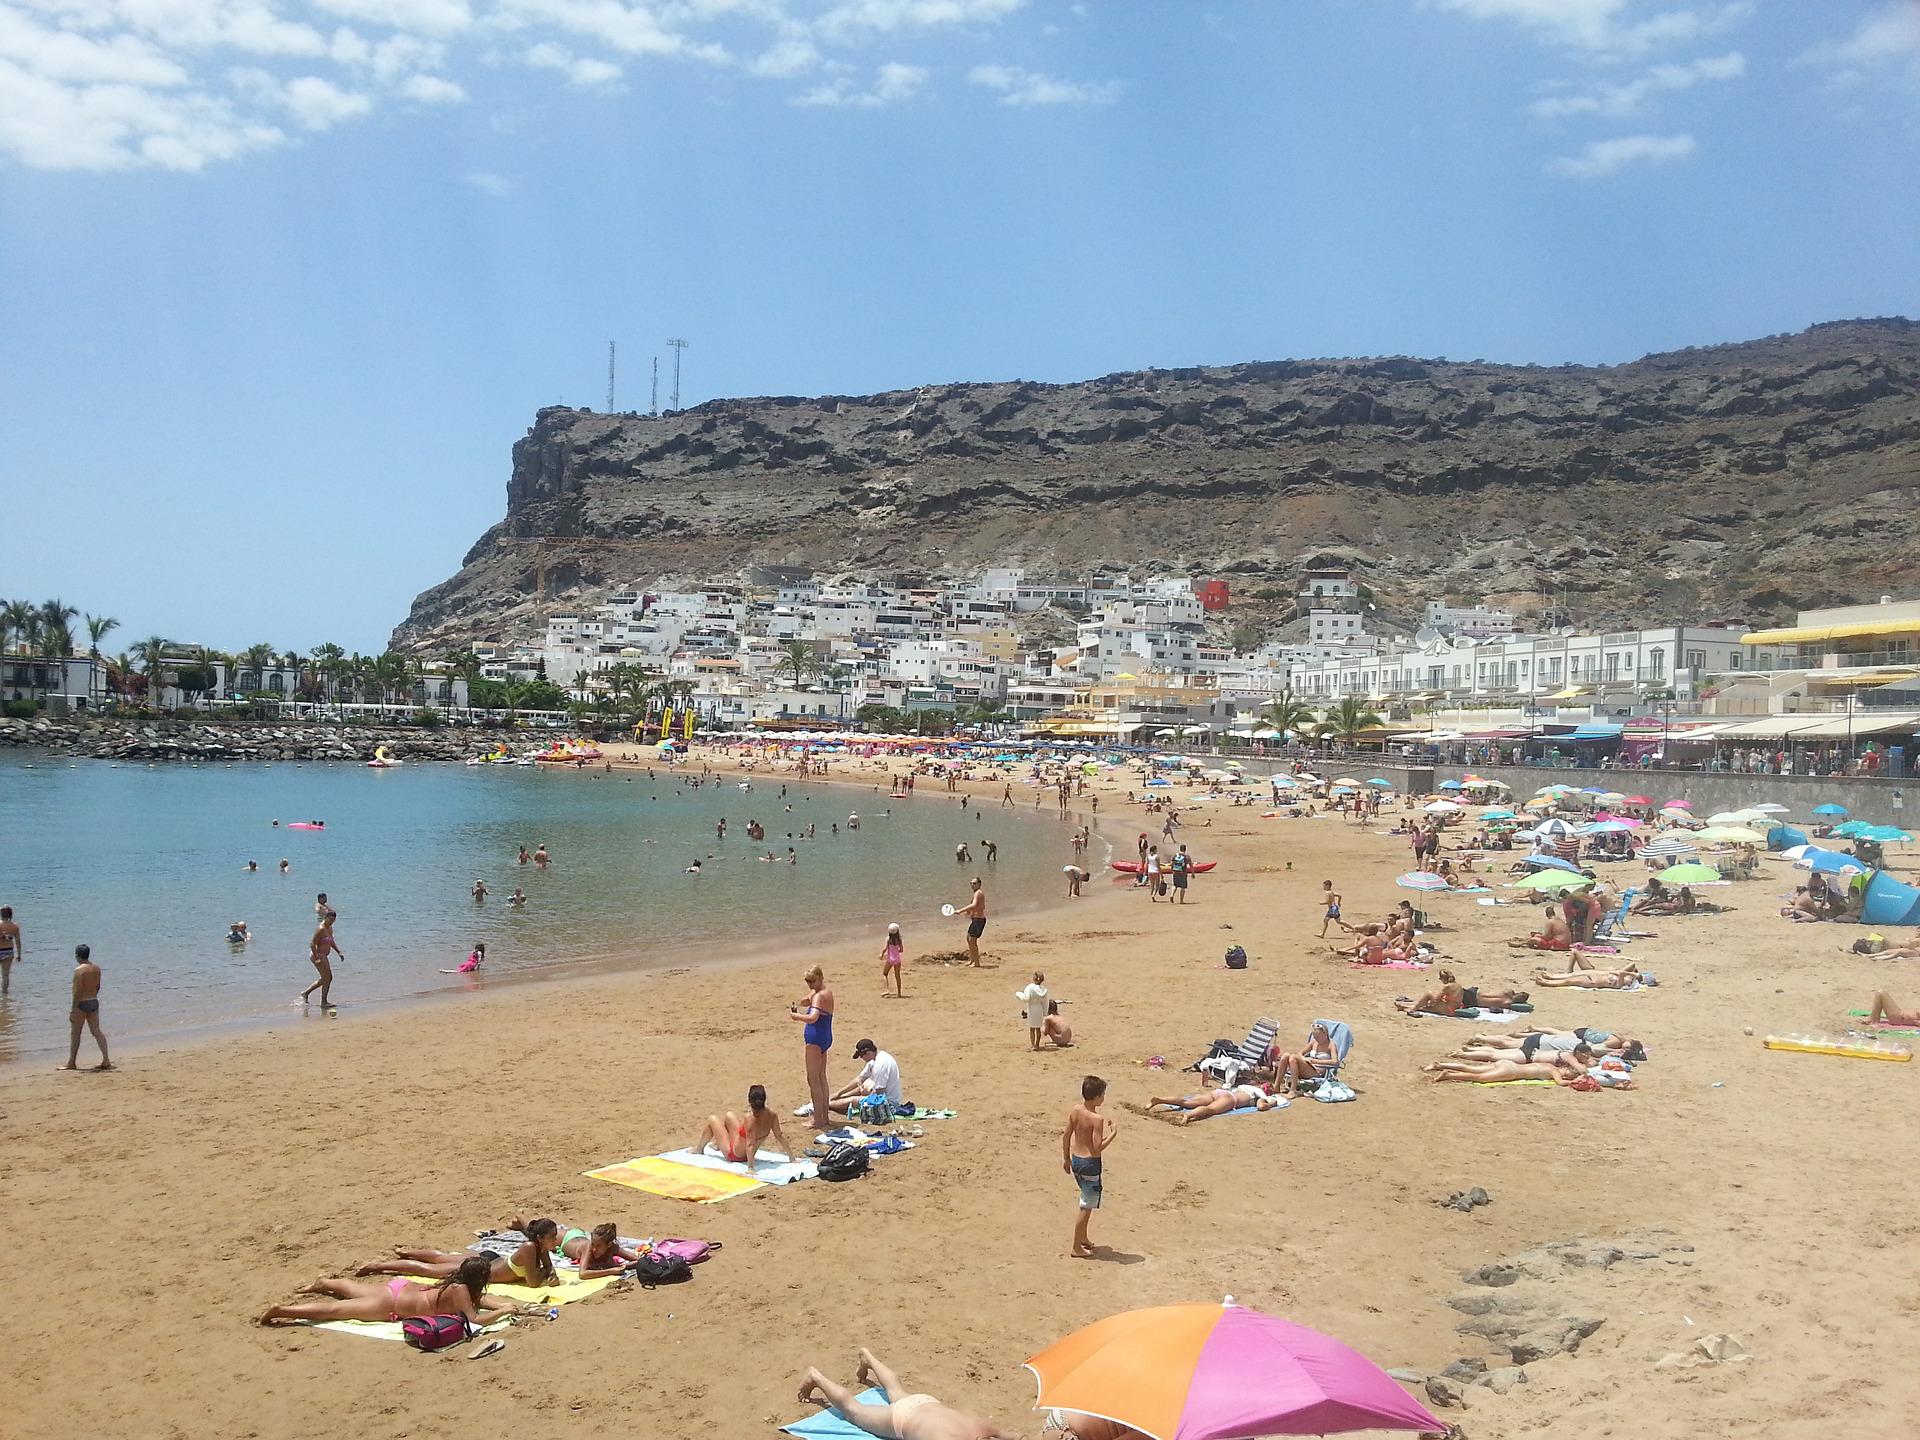 How To Get From Gran Canaria Airport To Puerto de Mogan - All Possible Ways, cheapest way from Gran Canaria airport to Puerto de Mogan, Gran Canaria airport to Puerto de Mogan, Gran Canaria airport to Puerto de Mogan, Gran Canaria airport to Puerto de Mogan, Gran Canaria Bus Airport, bus from Gran Canaria airport to Puerto de Mogan, taxi Gran Canaria airport to Puerto de Mogan, Uber Gran Canaria airport to Puerto de Mogan, Gran Canaria airport to Puerto de Mogan by bus, Gran Canaria airport to Puerto de Mogan, Gran Canaria to Puerto de Mogan, Global bus fare Gran Canaria airport to Puerto de Mogan, Gran Canaria airport to taurito,